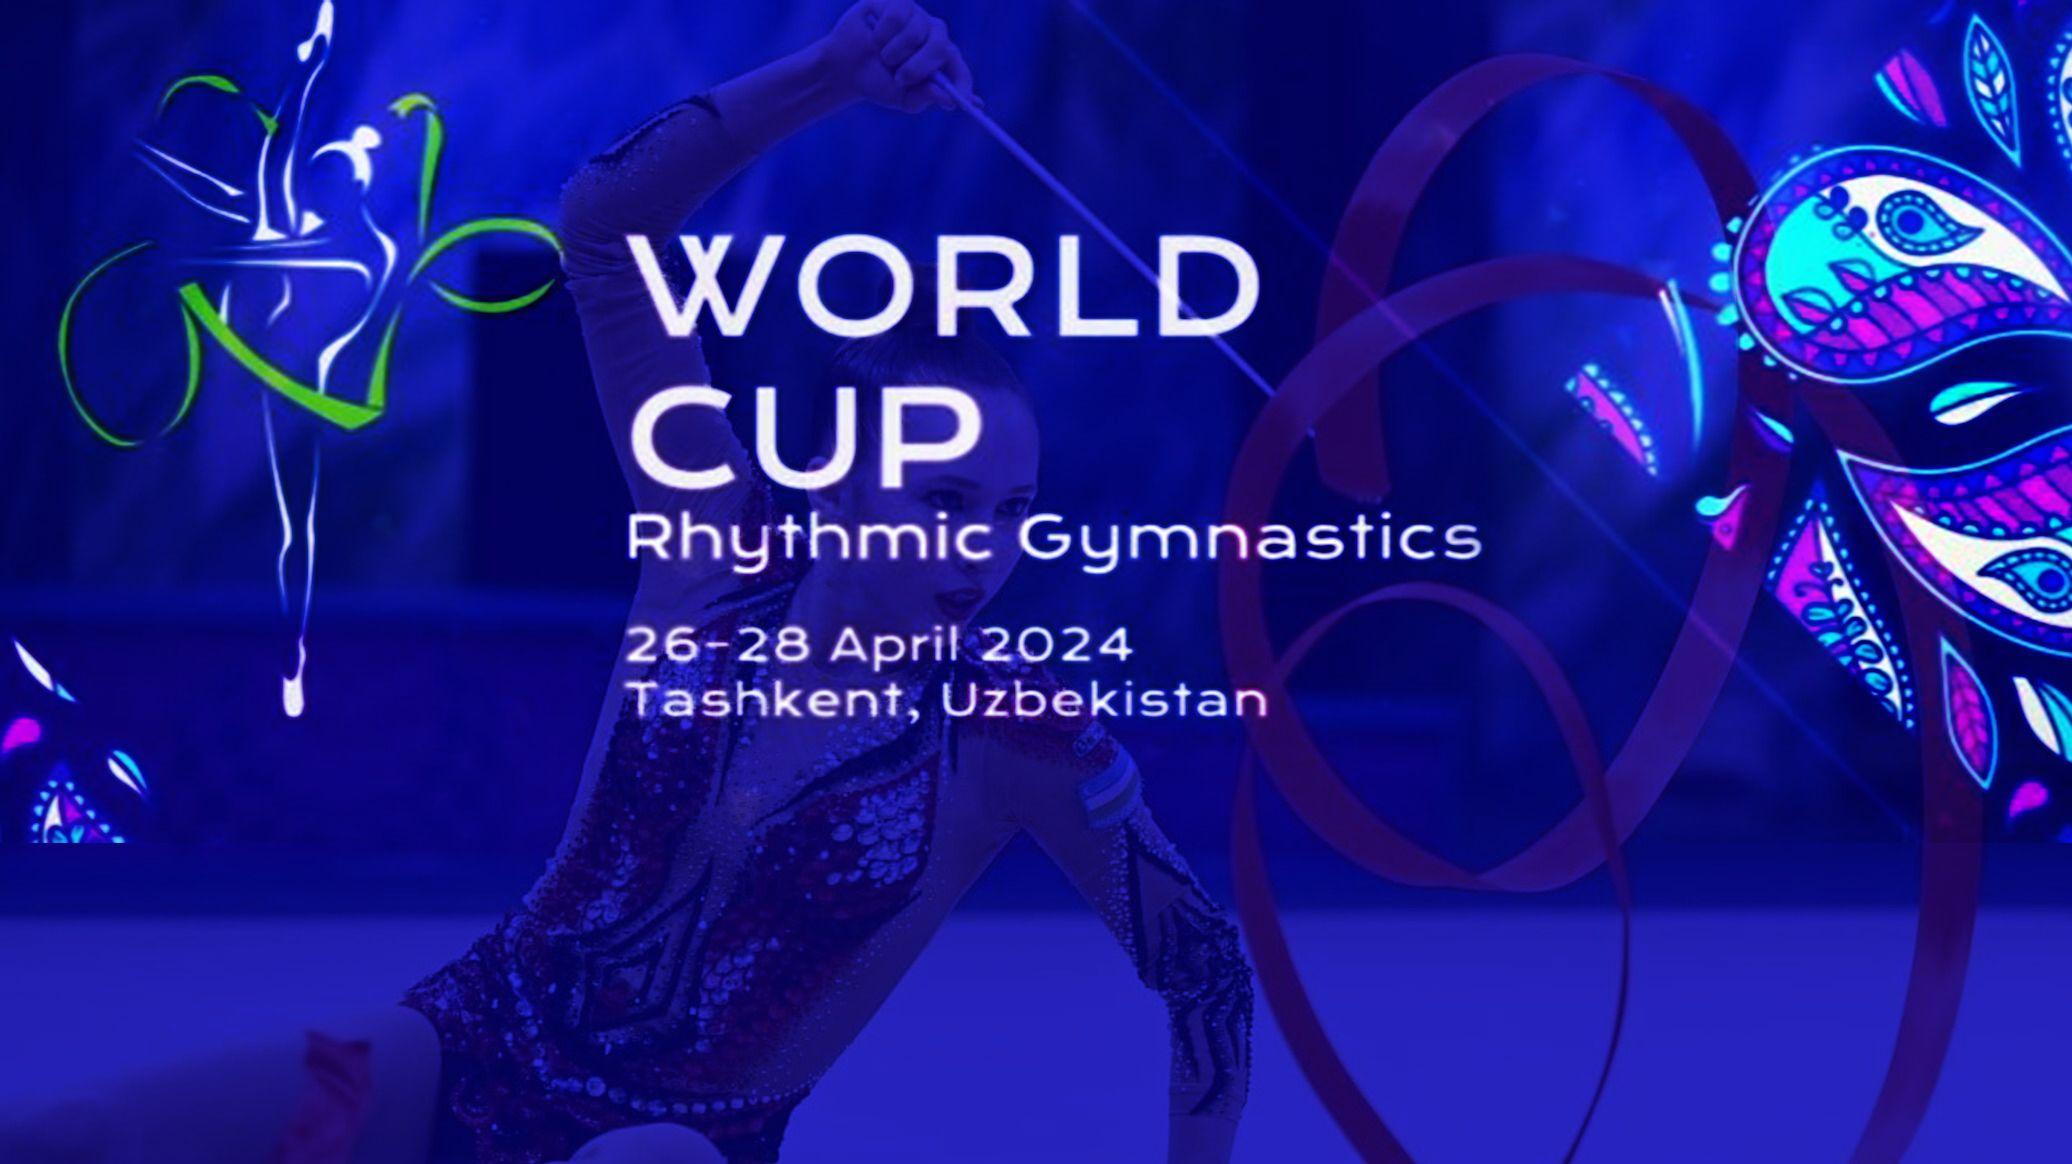 Tashkent prepares to host the 4th stage of the Artistic Gymnastics World Cup